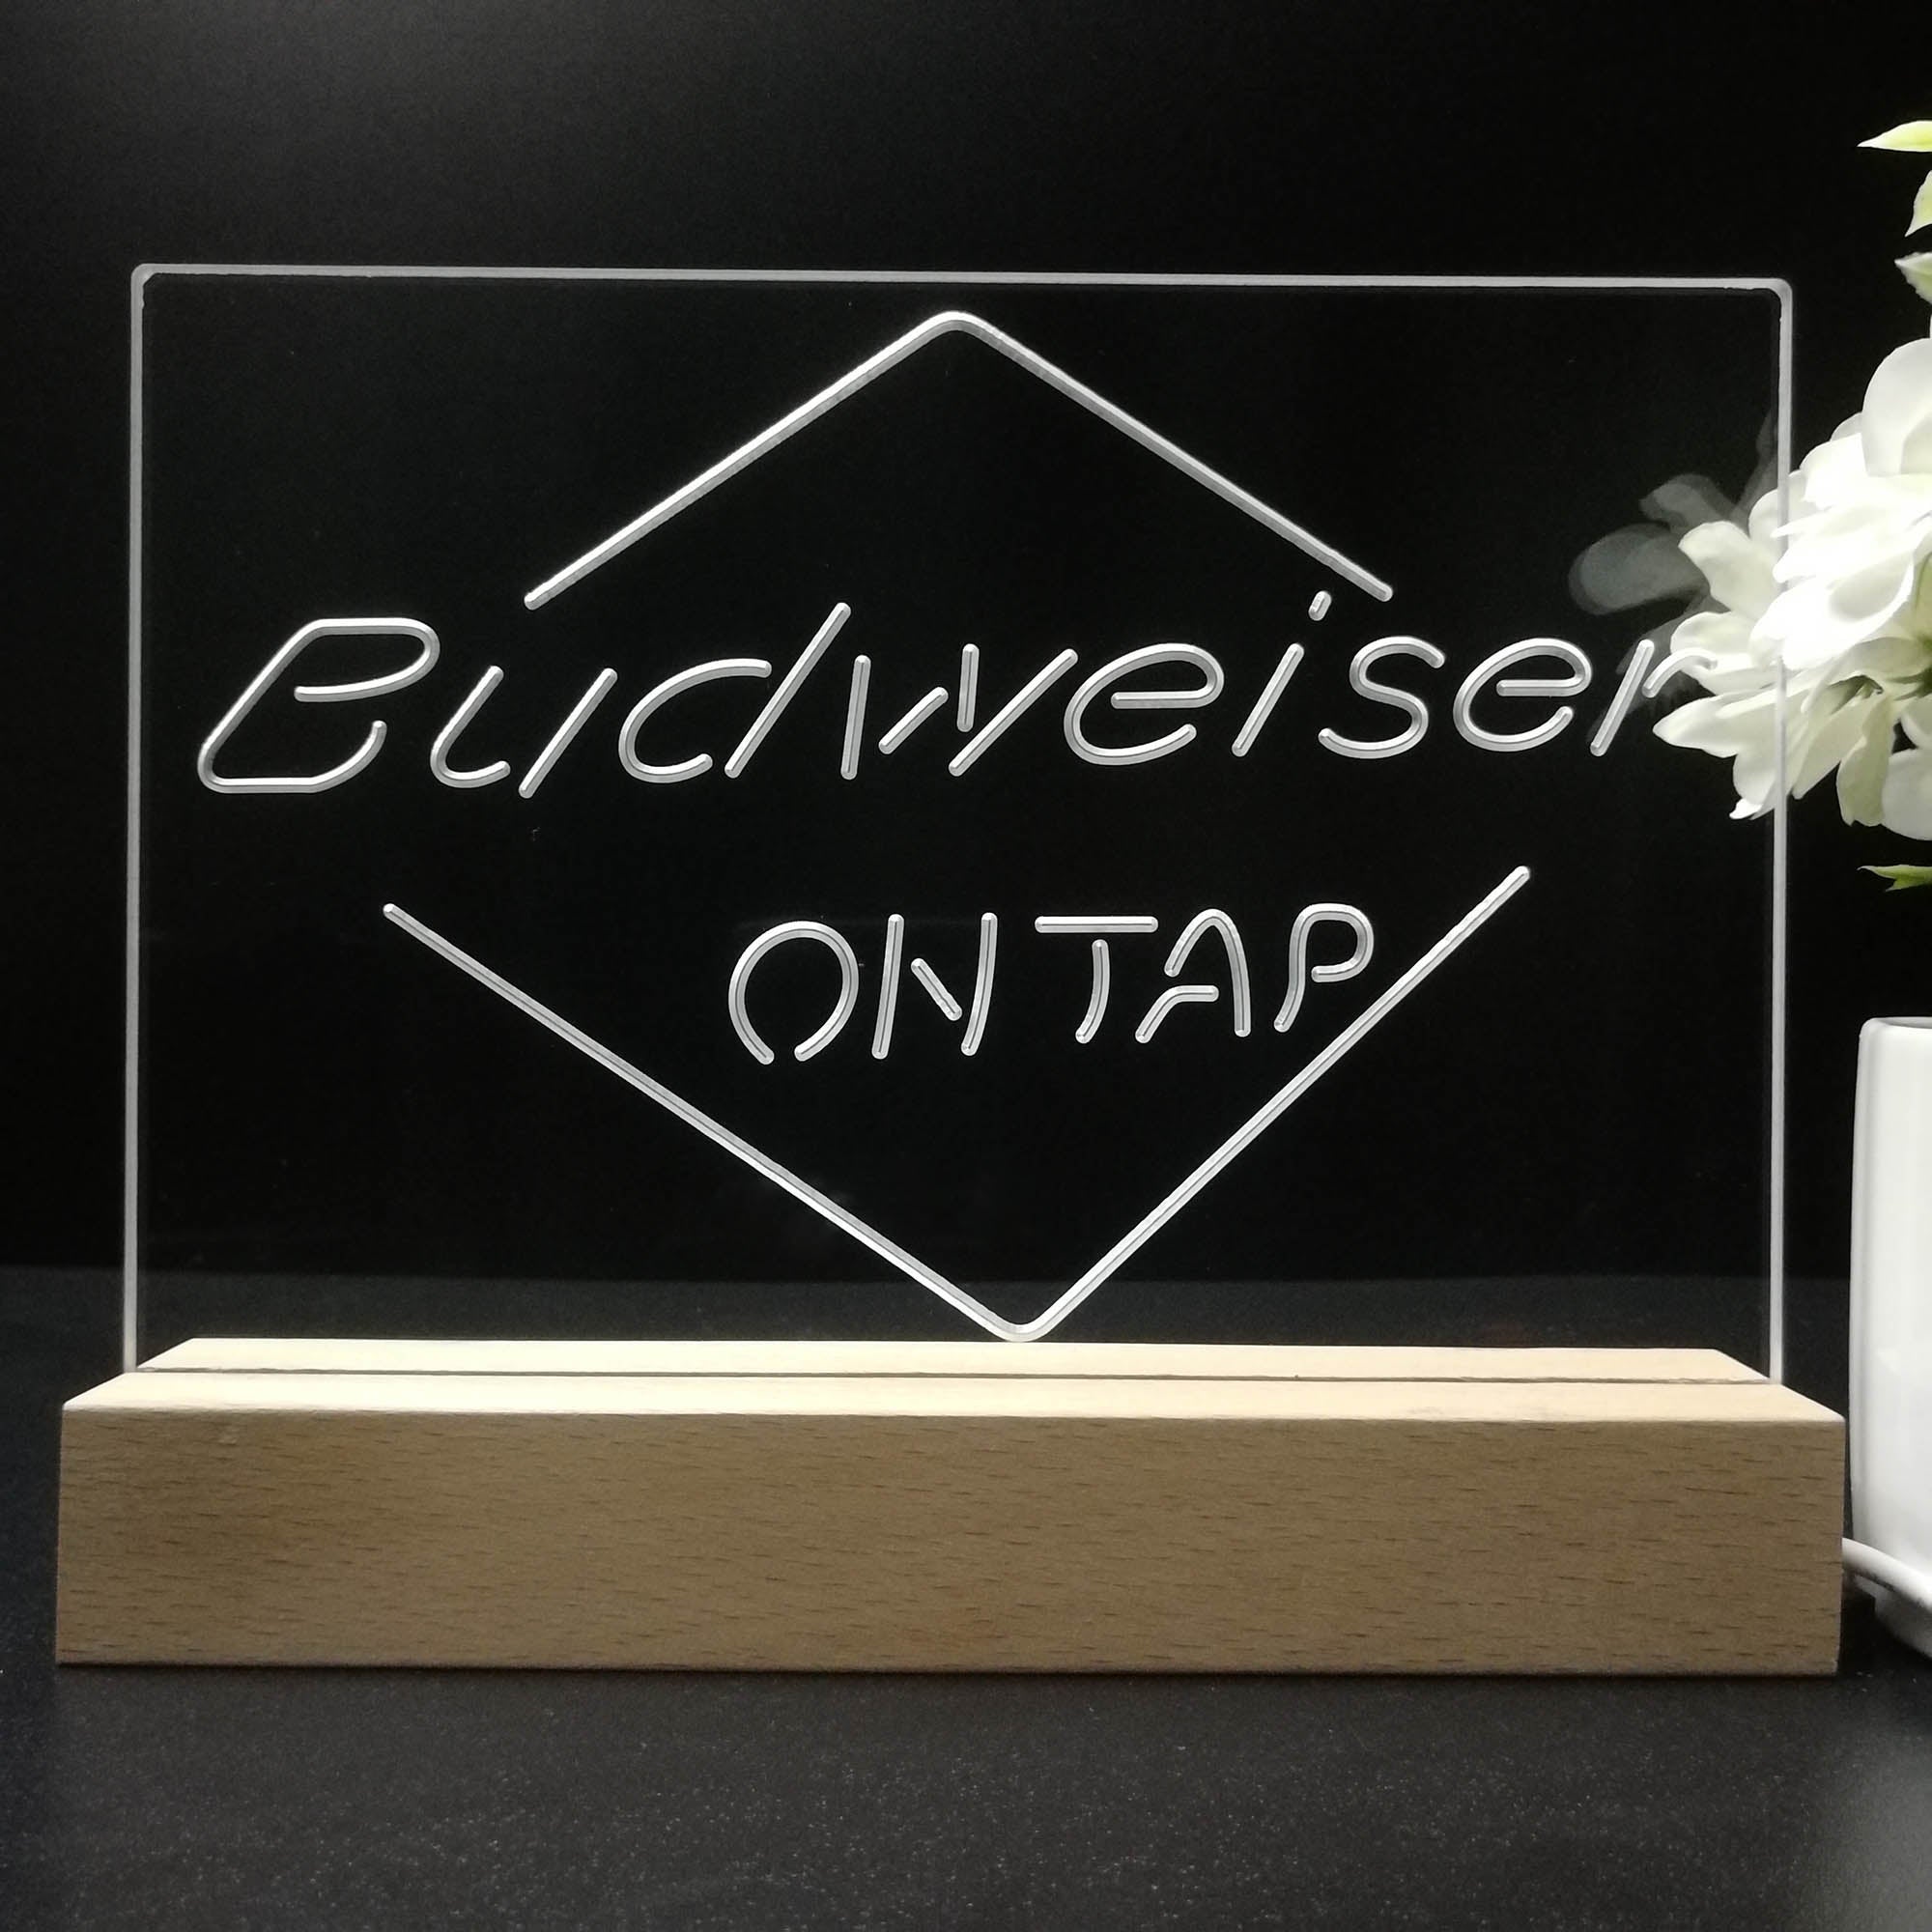 Budweiser On Tap Beer Neon Sign Pub Bar Lamp